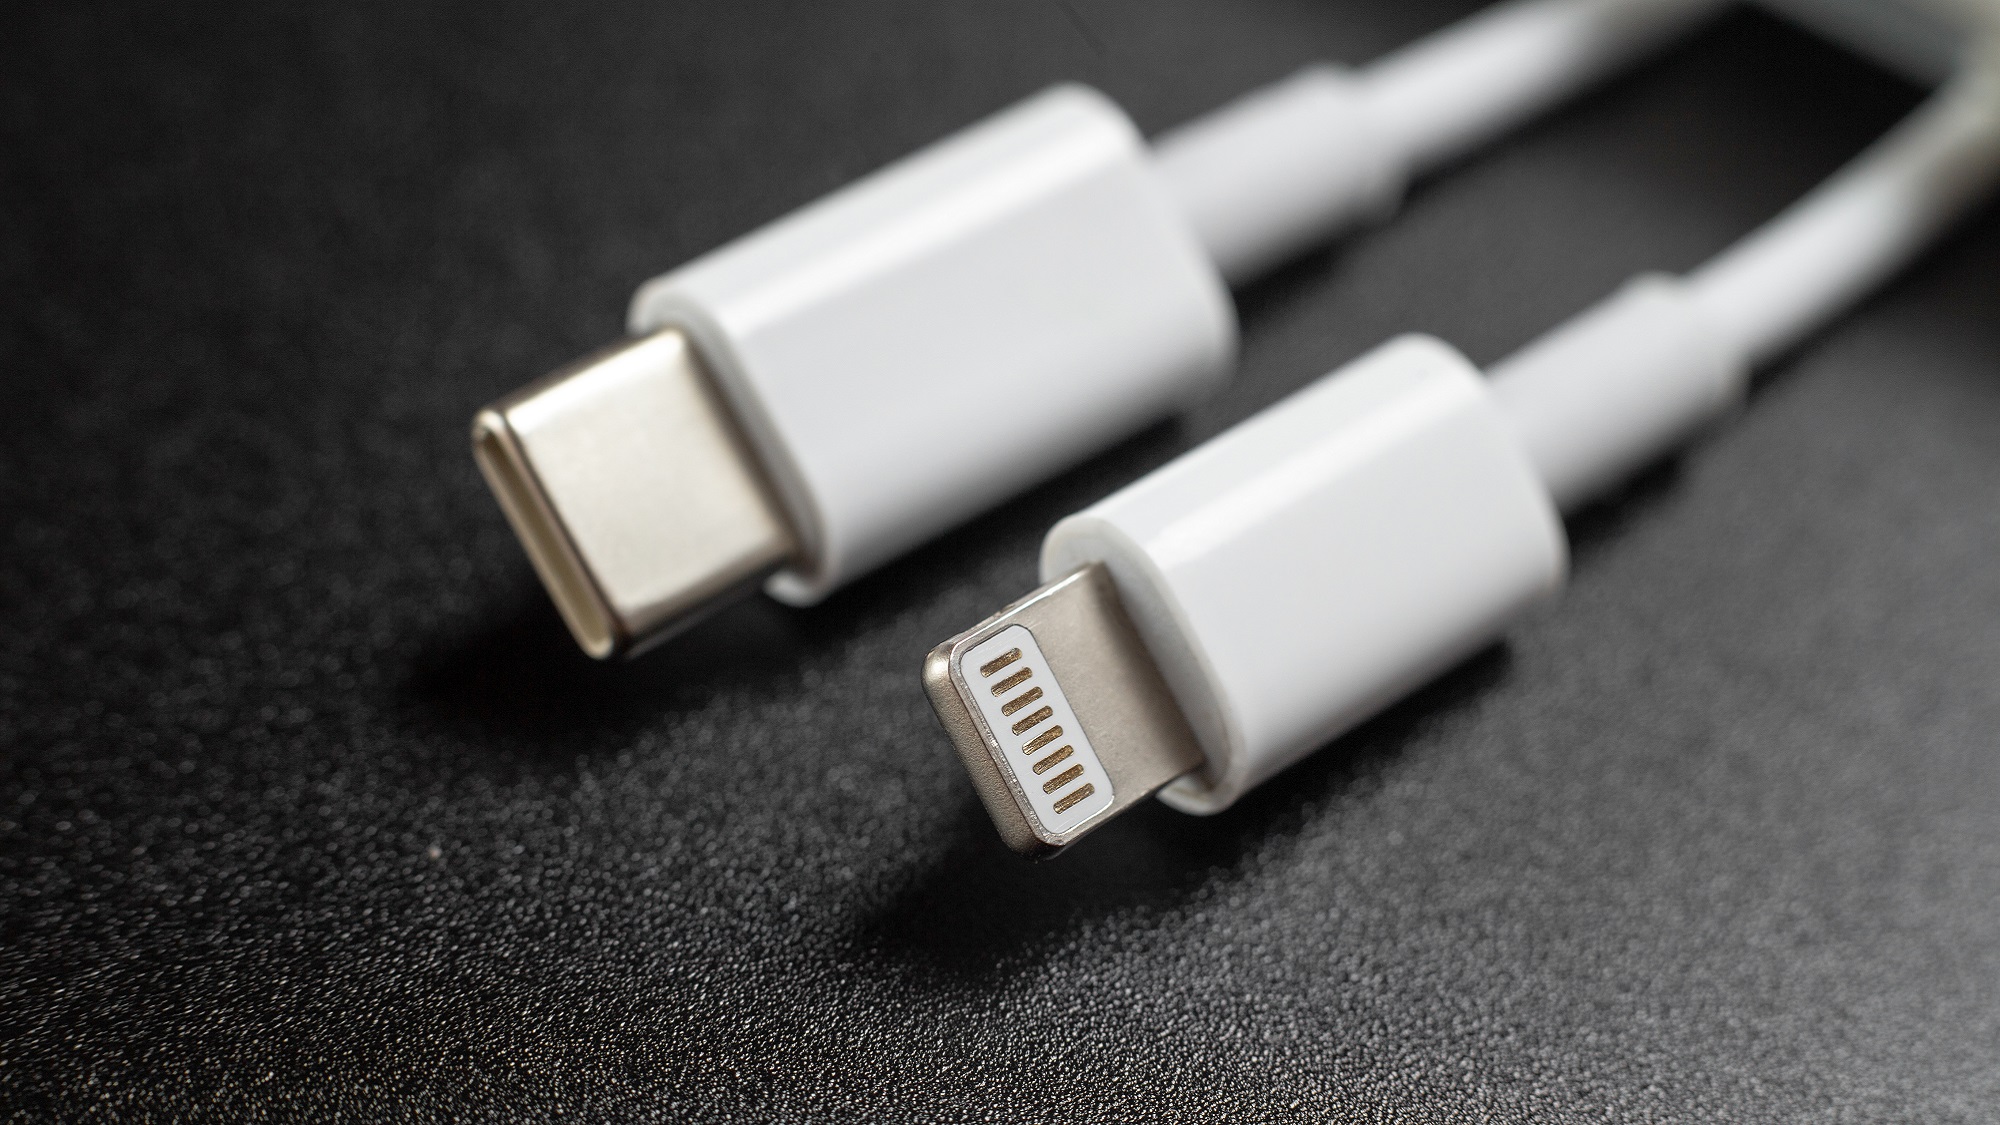 Apple could be forced to give iPhones USB-C ports if new law passes